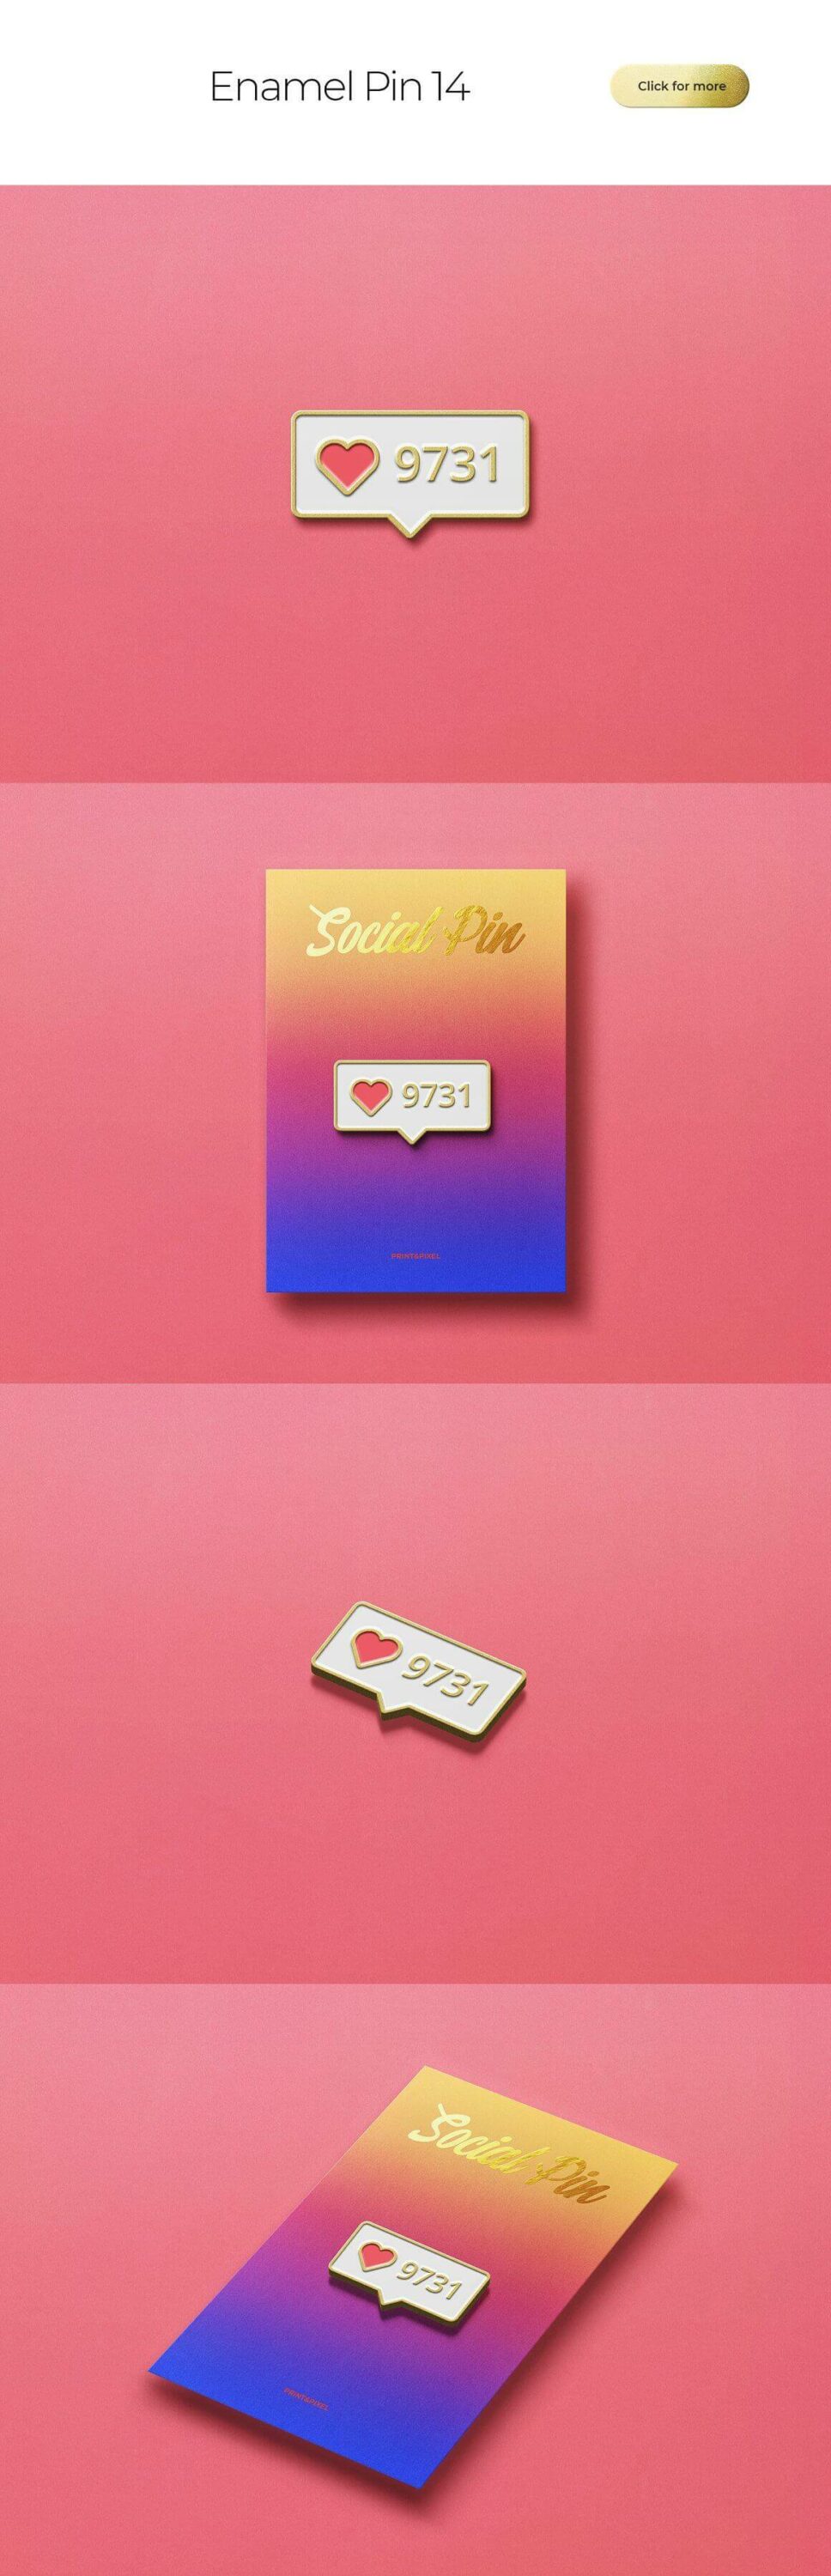 Social pin on a pink background.